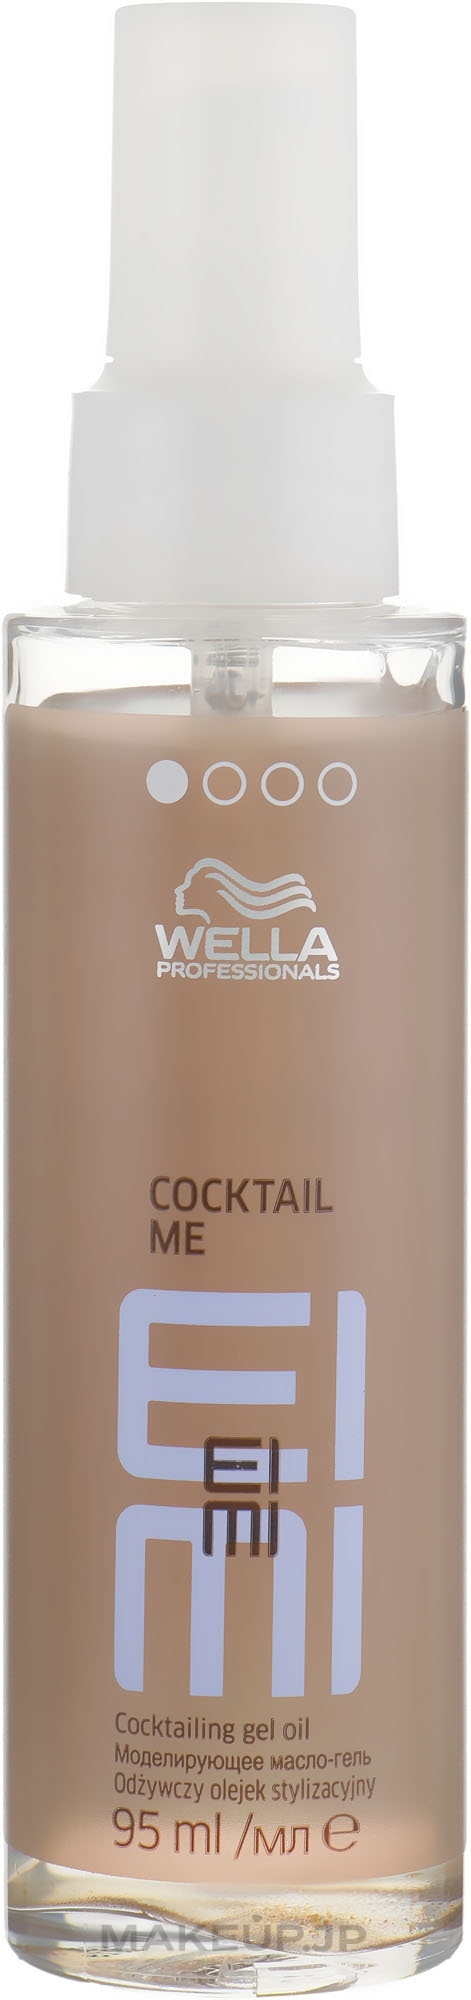 Modeling Oil Gel - Wella Professionals EIMI Cocktail Me — photo 95 ml